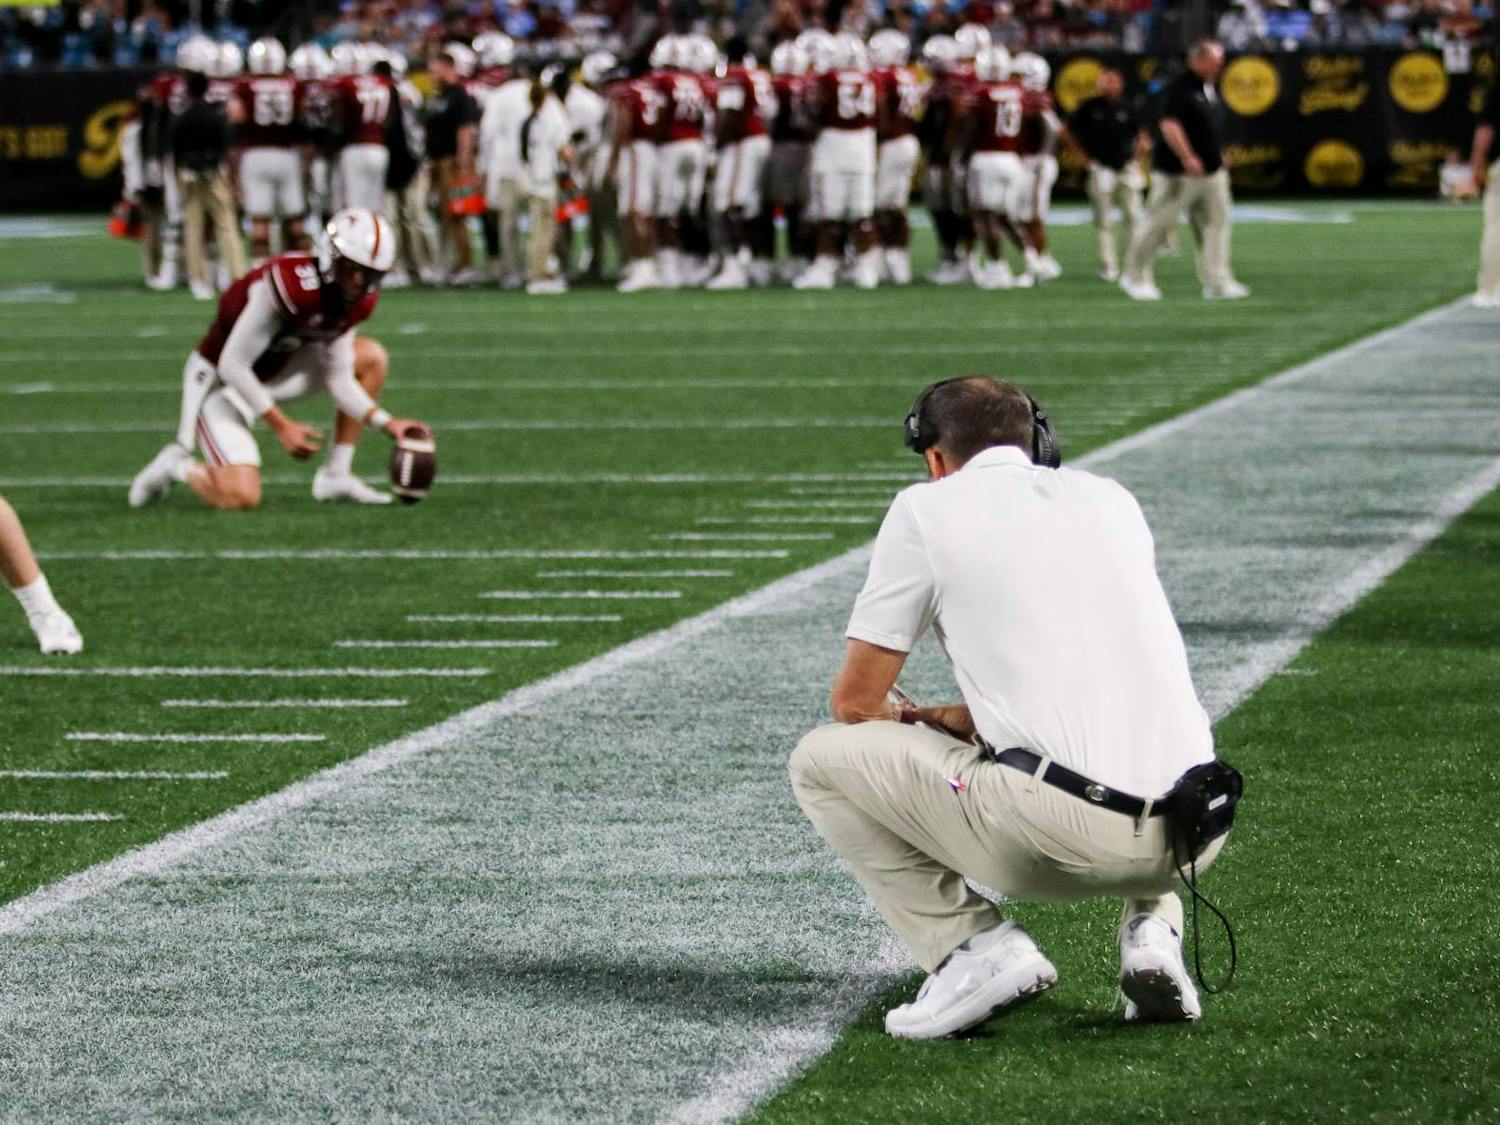 South Carolina head coach Shane Beamer squats on the sidelines during a break in play. The Gamecocks lost to the Tar Heels 31-17 on Sept. 2, 2023 in Charlotte, North Carolina.